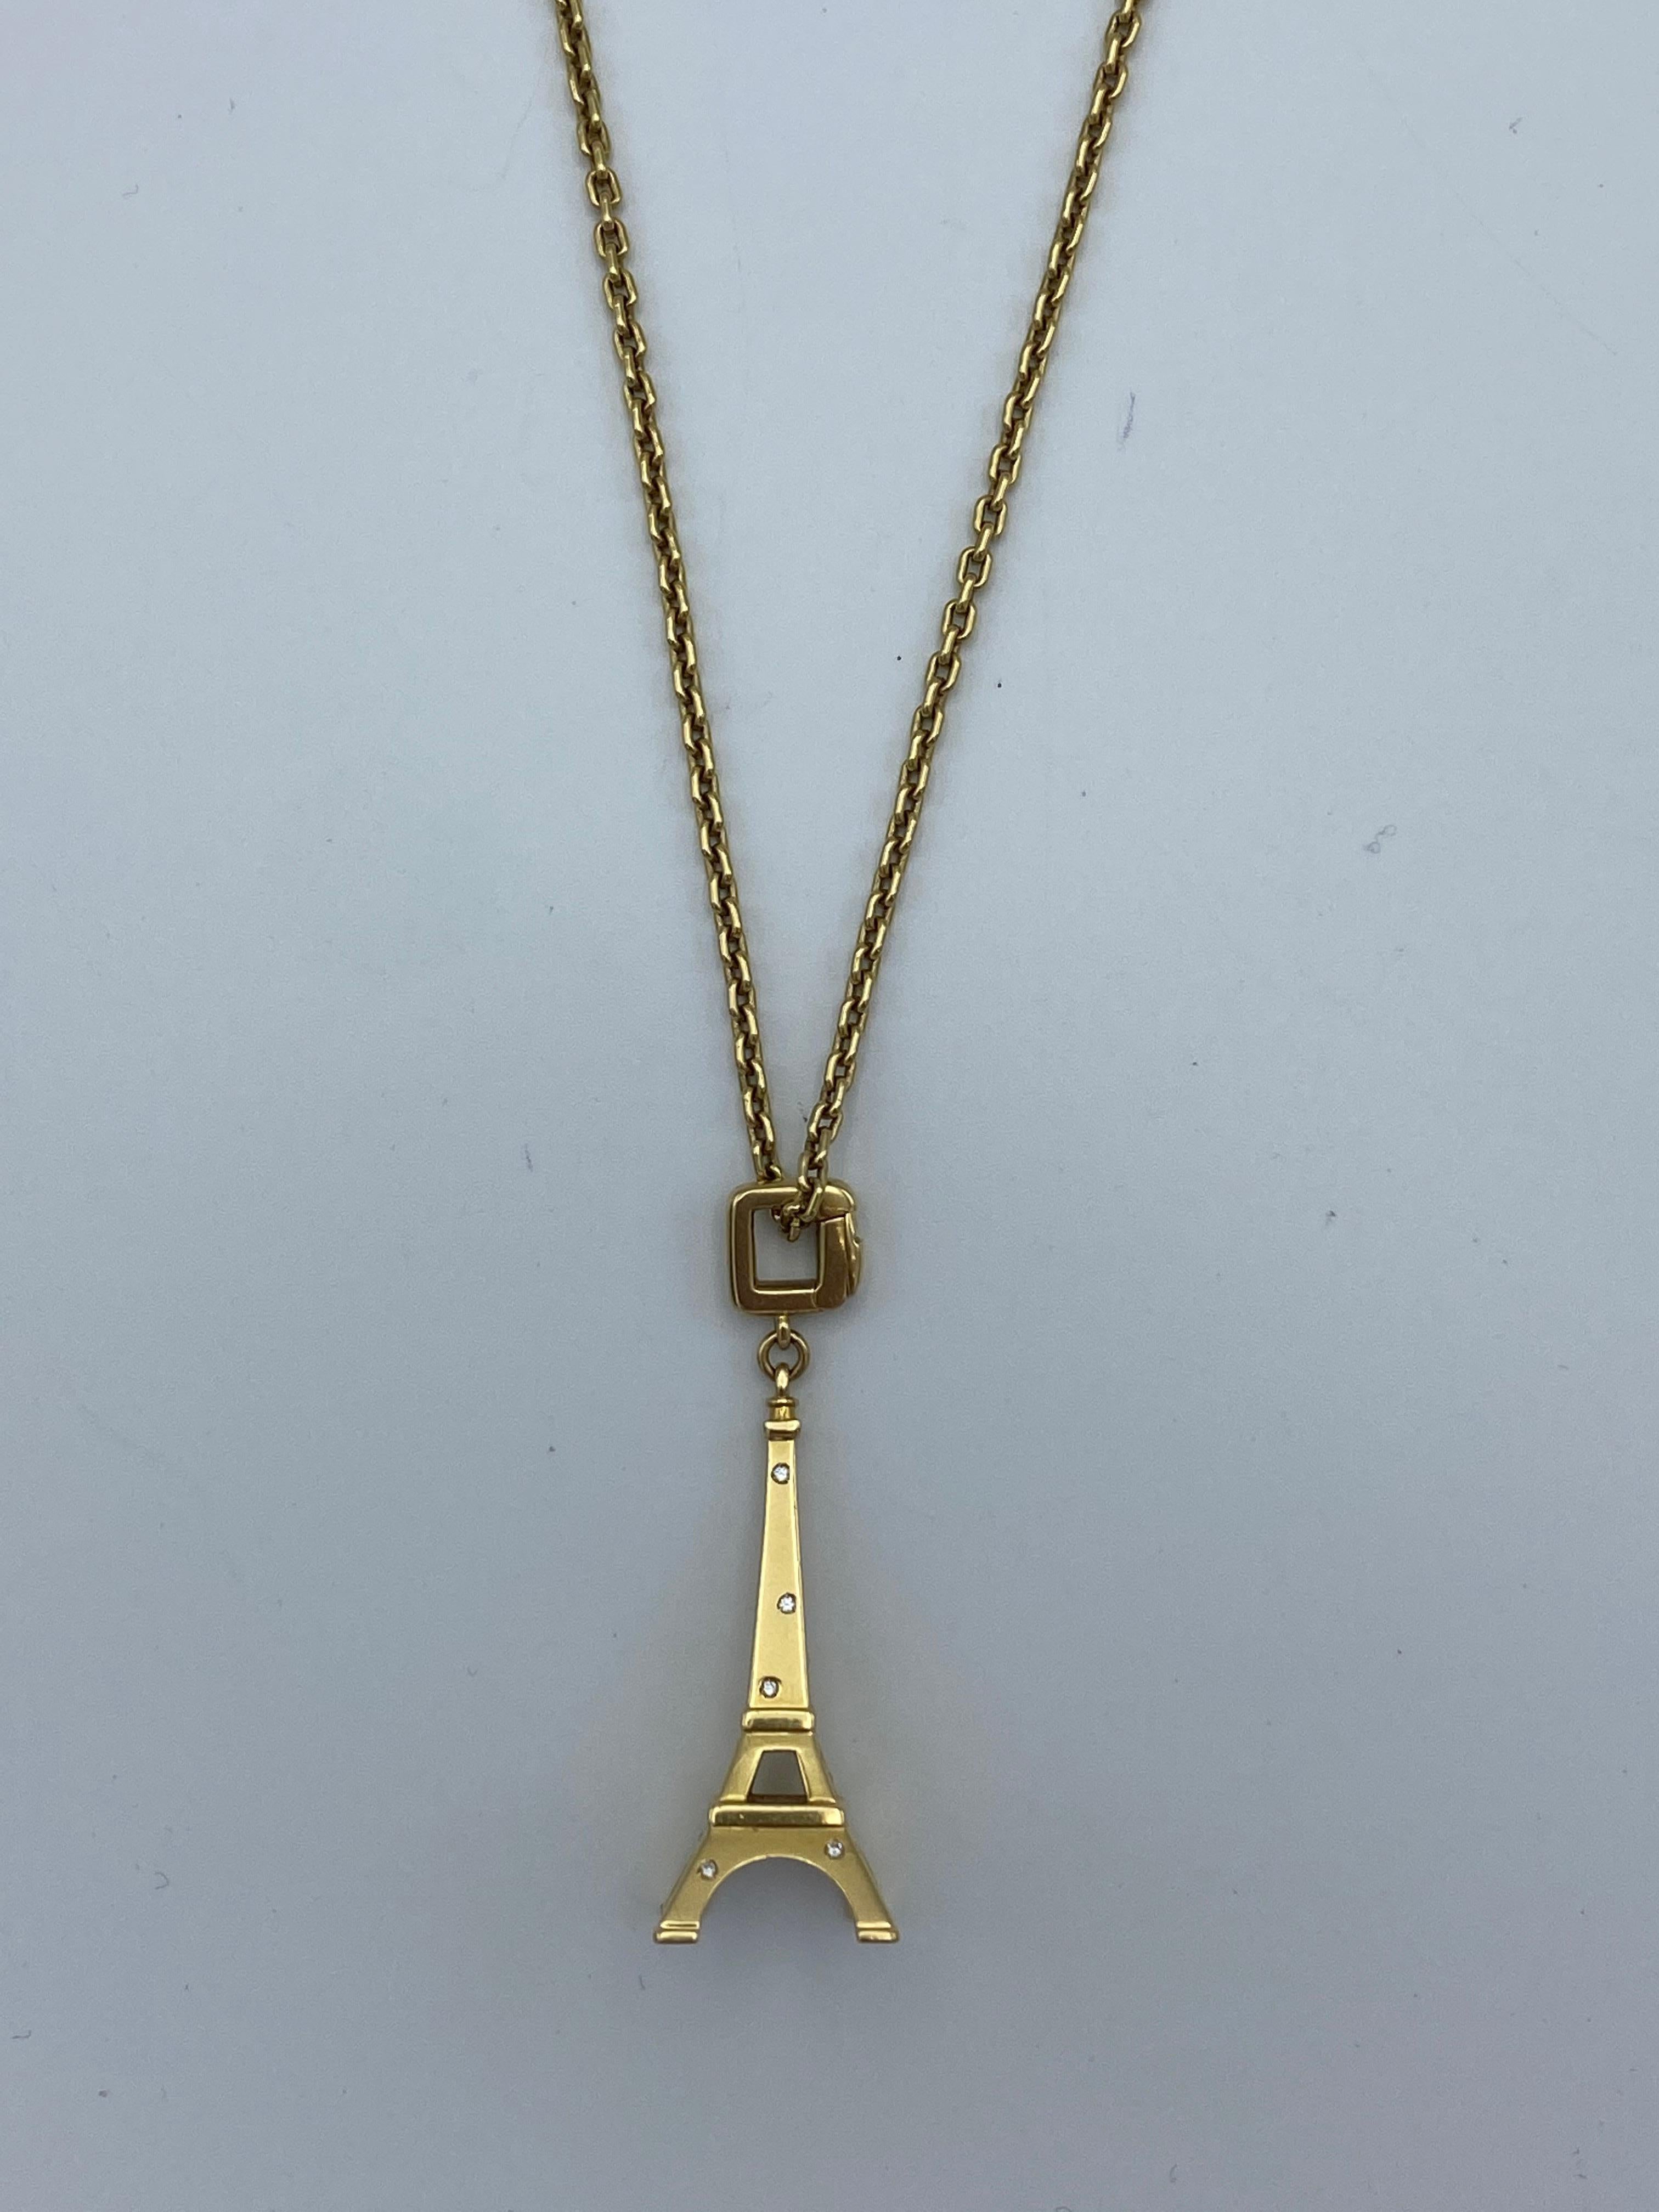 Product details:

The necklace is designed by Louis Vuitton and it is made out of 18 karat yellow gold, featuring boxed link chain necklace and Eiffel tower pendant with diamond detail.

Measurements: the chain is 20 inches long and 1/16